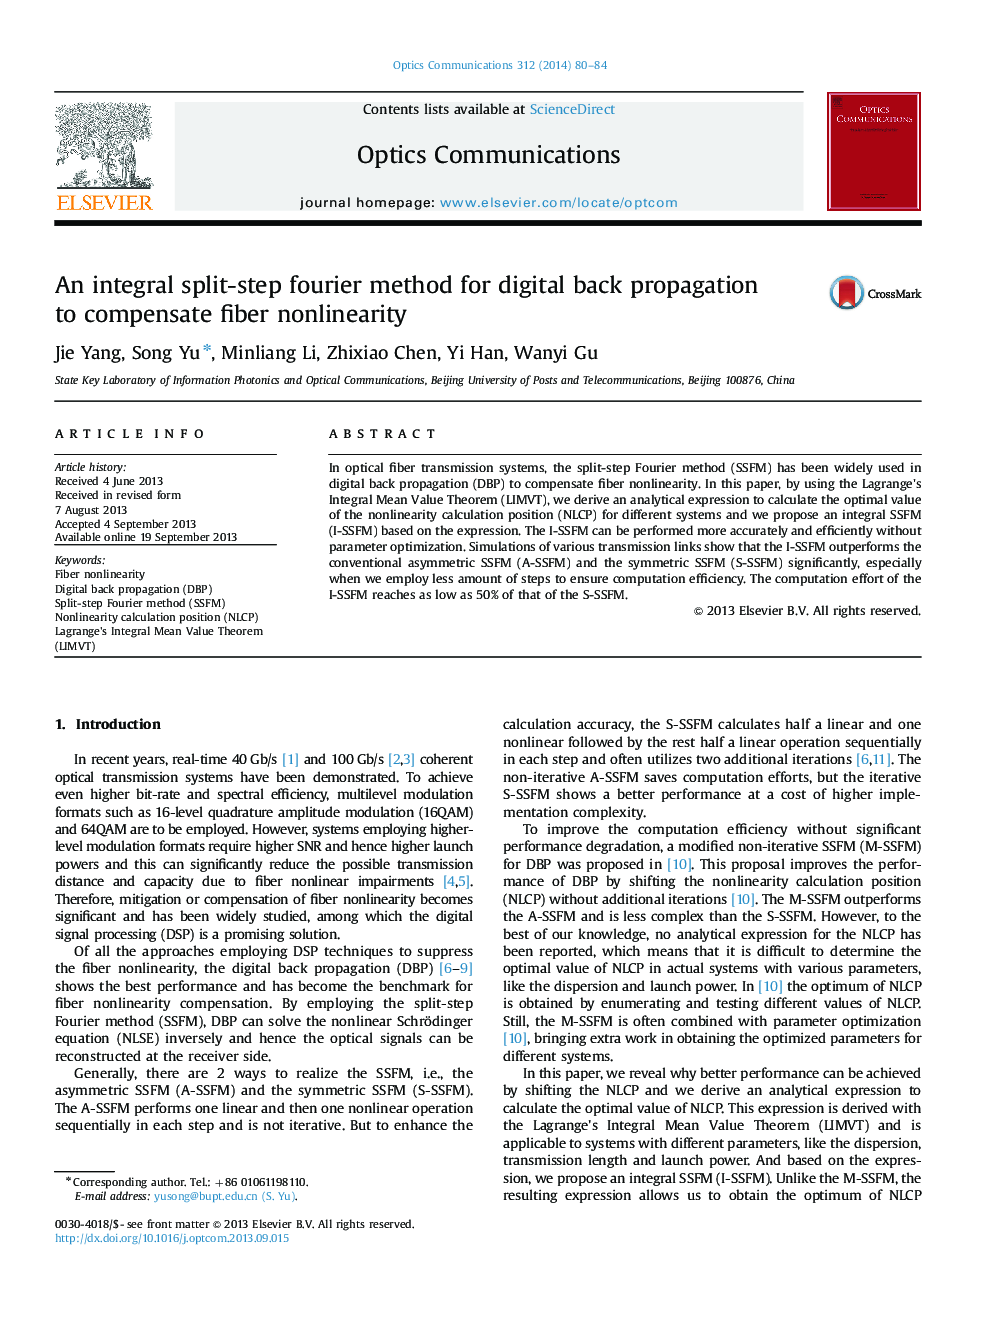 An integral split-step fourier method for digital back propagation to compensate fiber nonlinearity